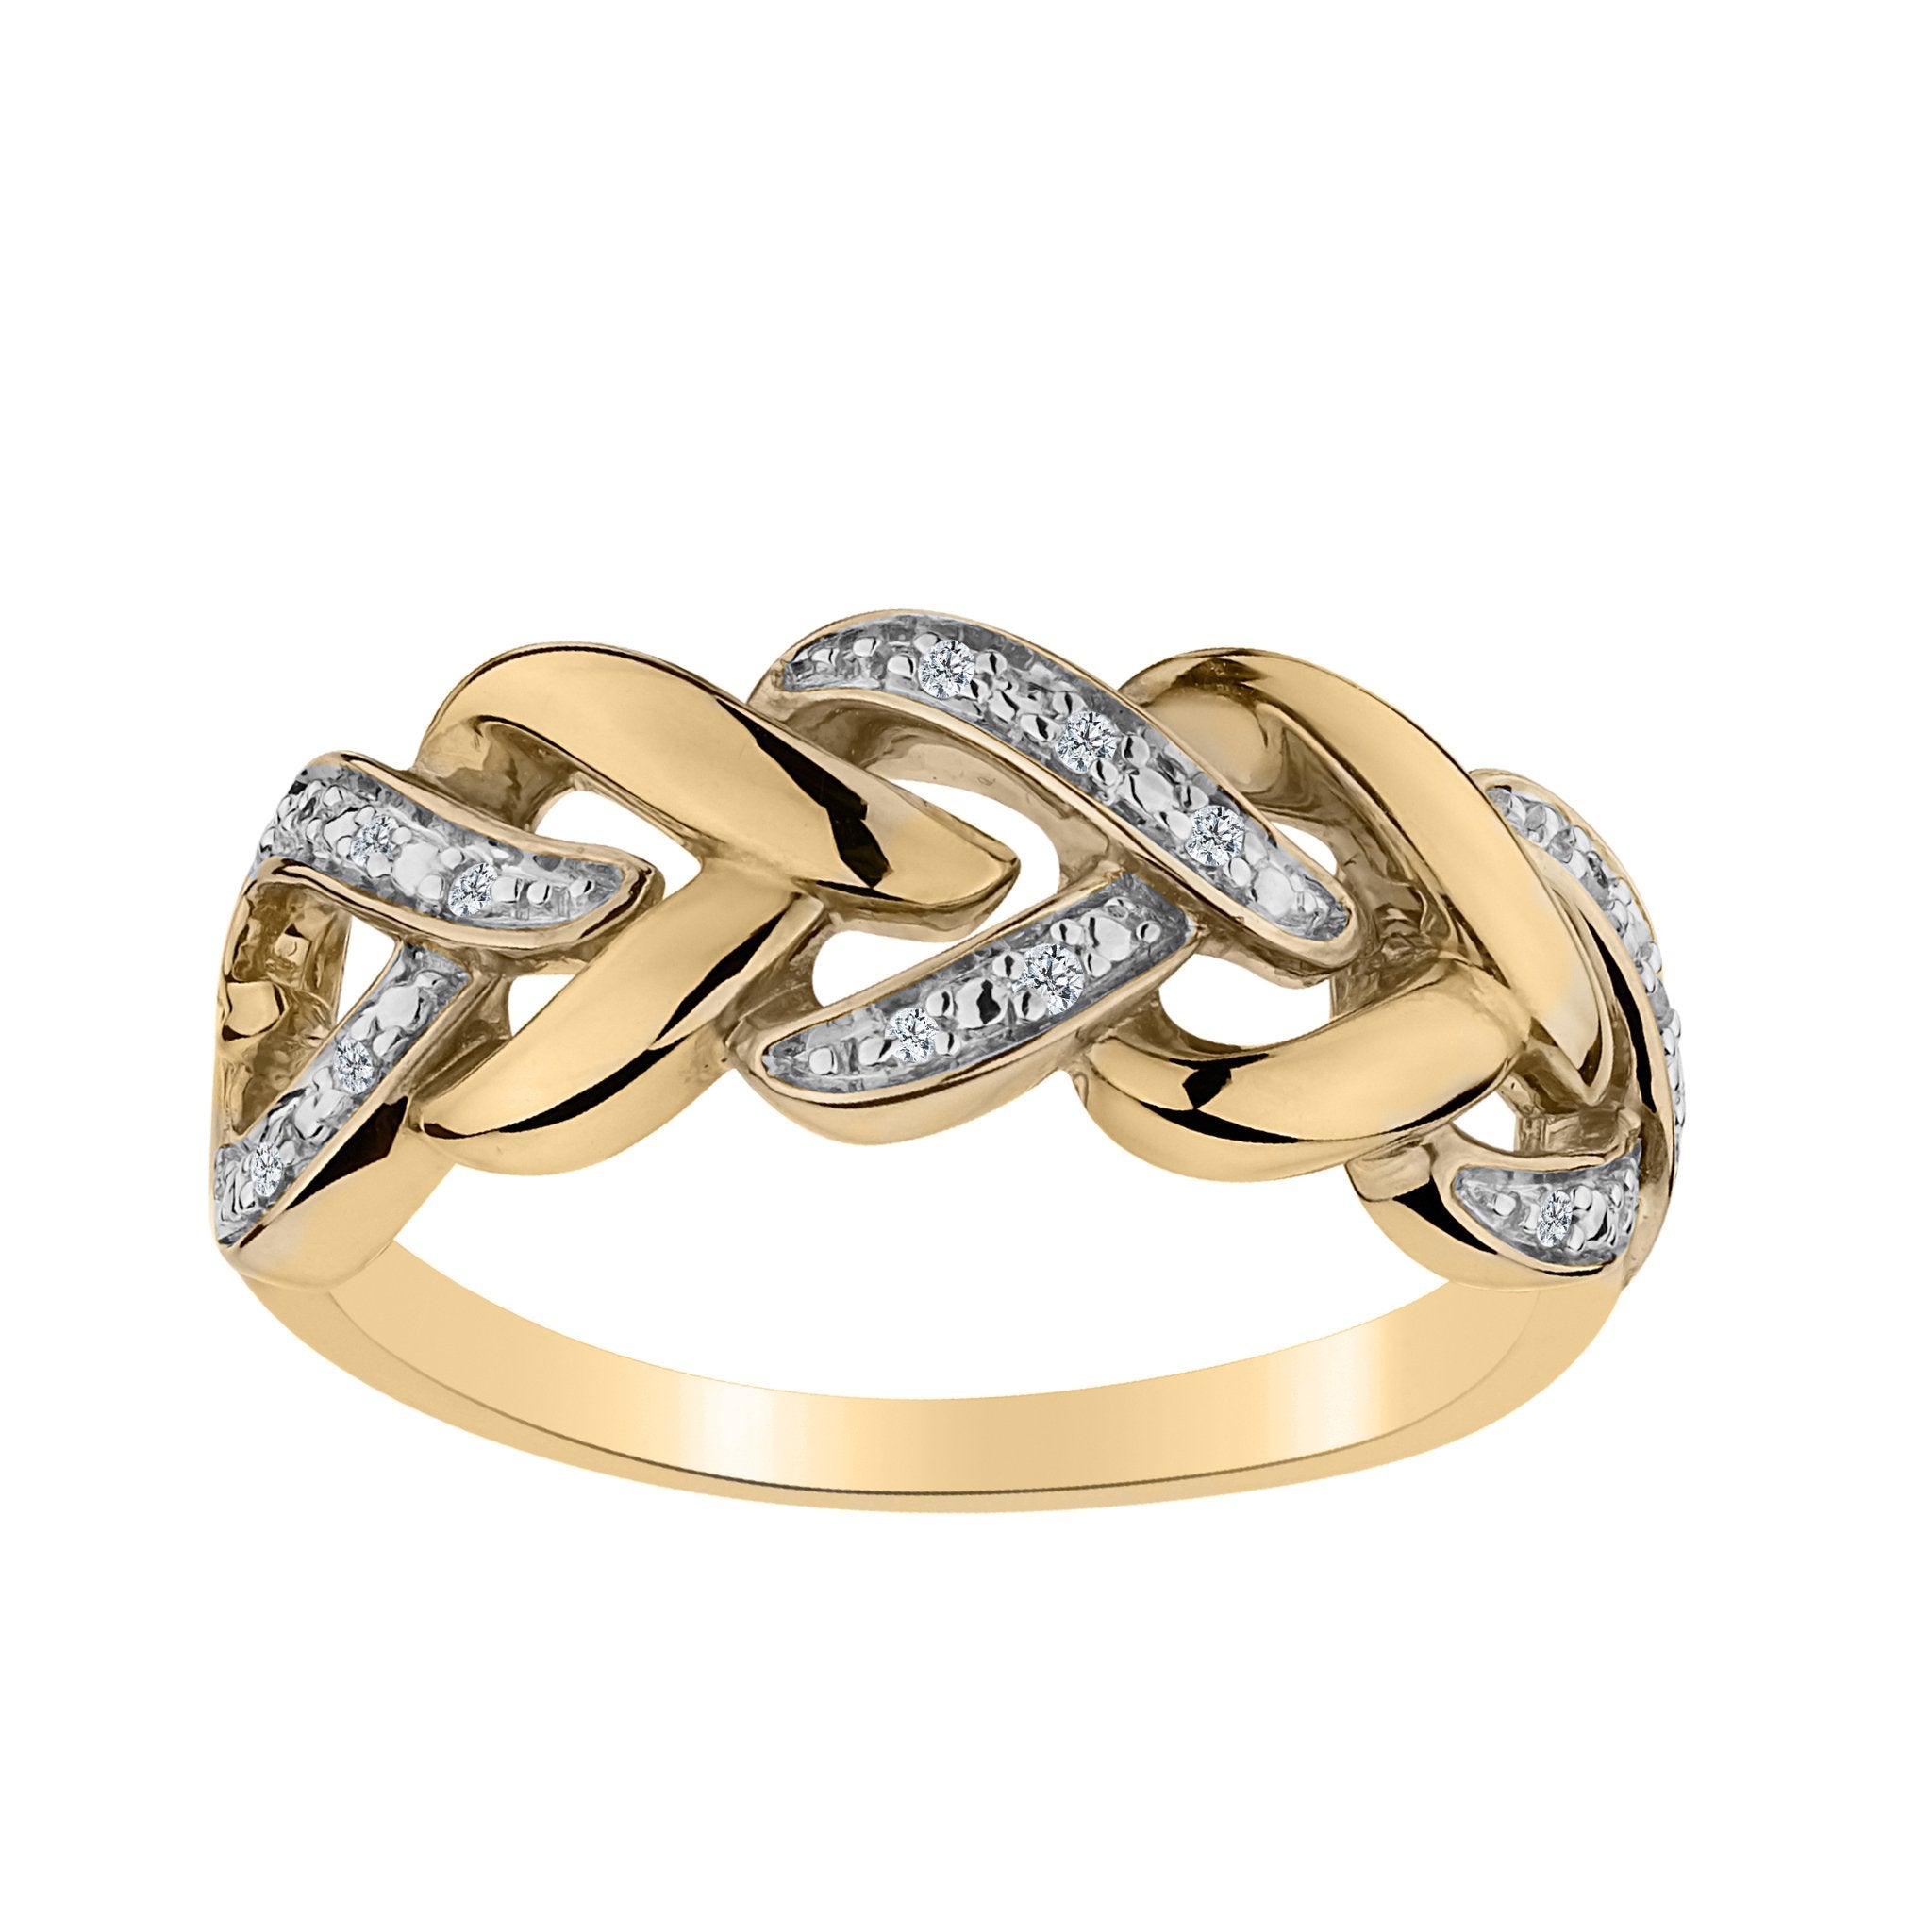 .05 CARAT DIAMOND "WOVEN" HEARTS RING, 10kt YELLOW GOLD. Fashion Rings - Griffin Jewellery Designs